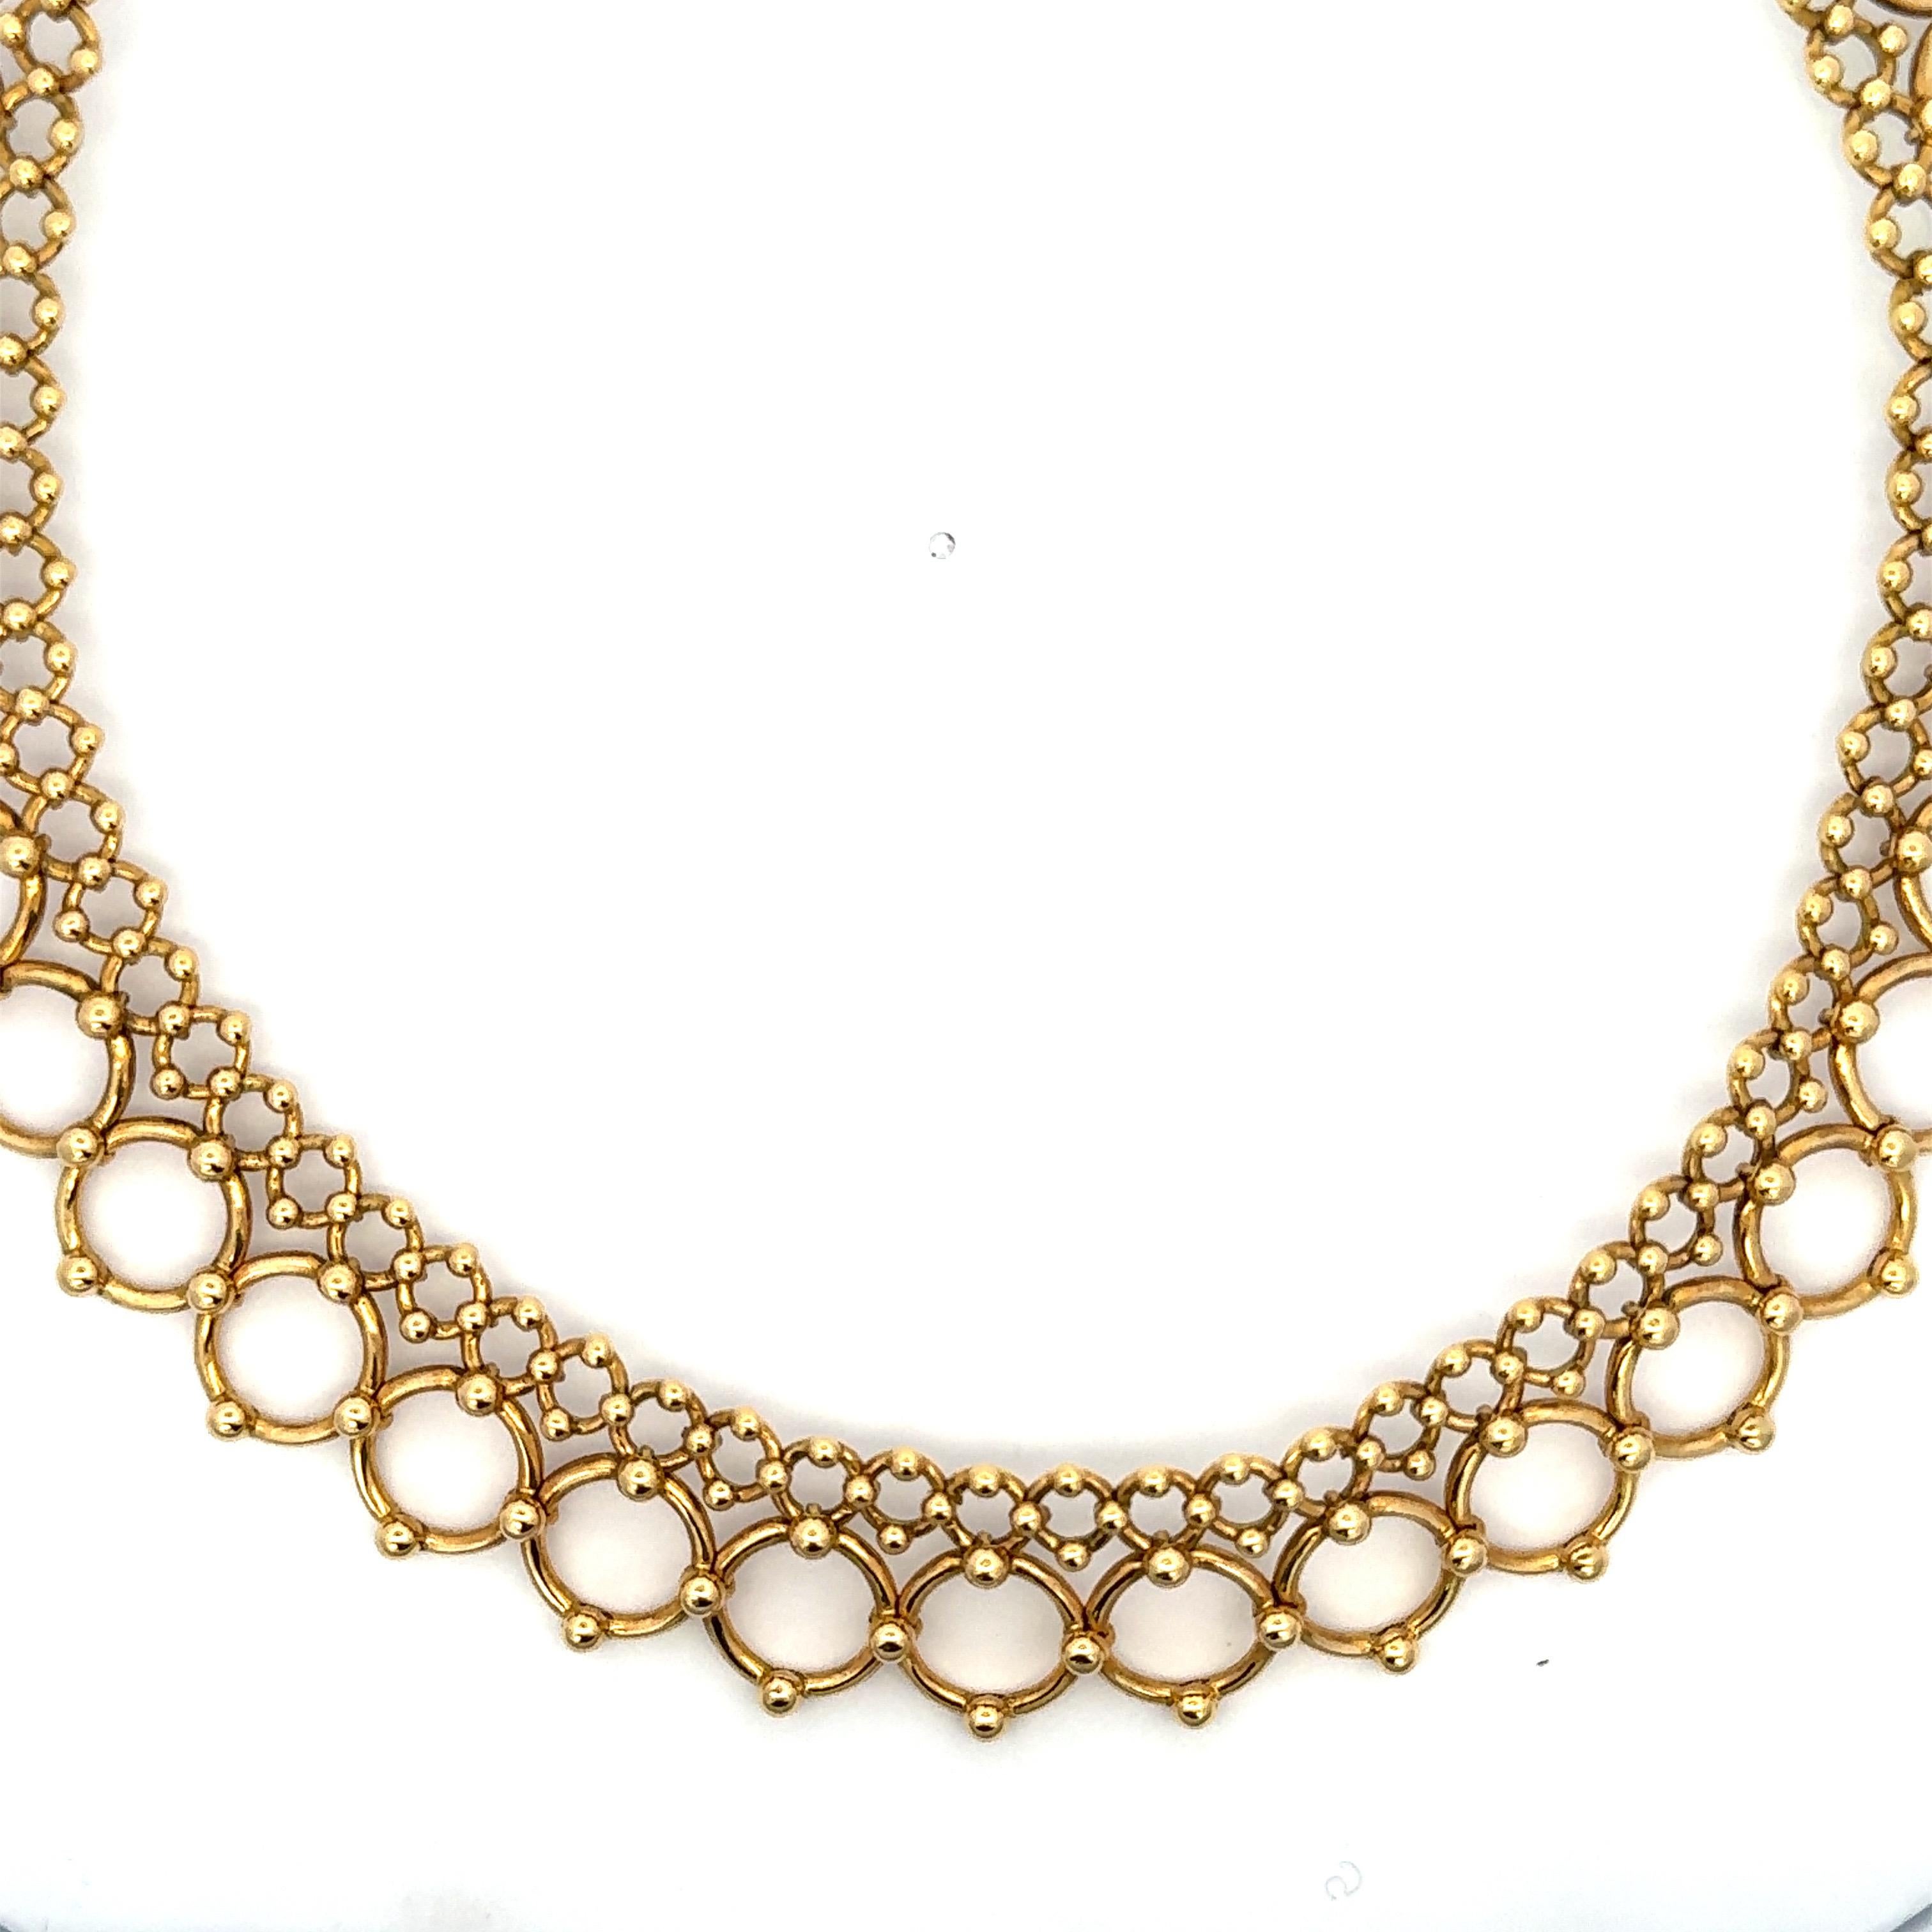 Signed Tiffany & Co, this necklace featuring a double row of graduated links weighing 73.9 grams in 18 yellow gold. 